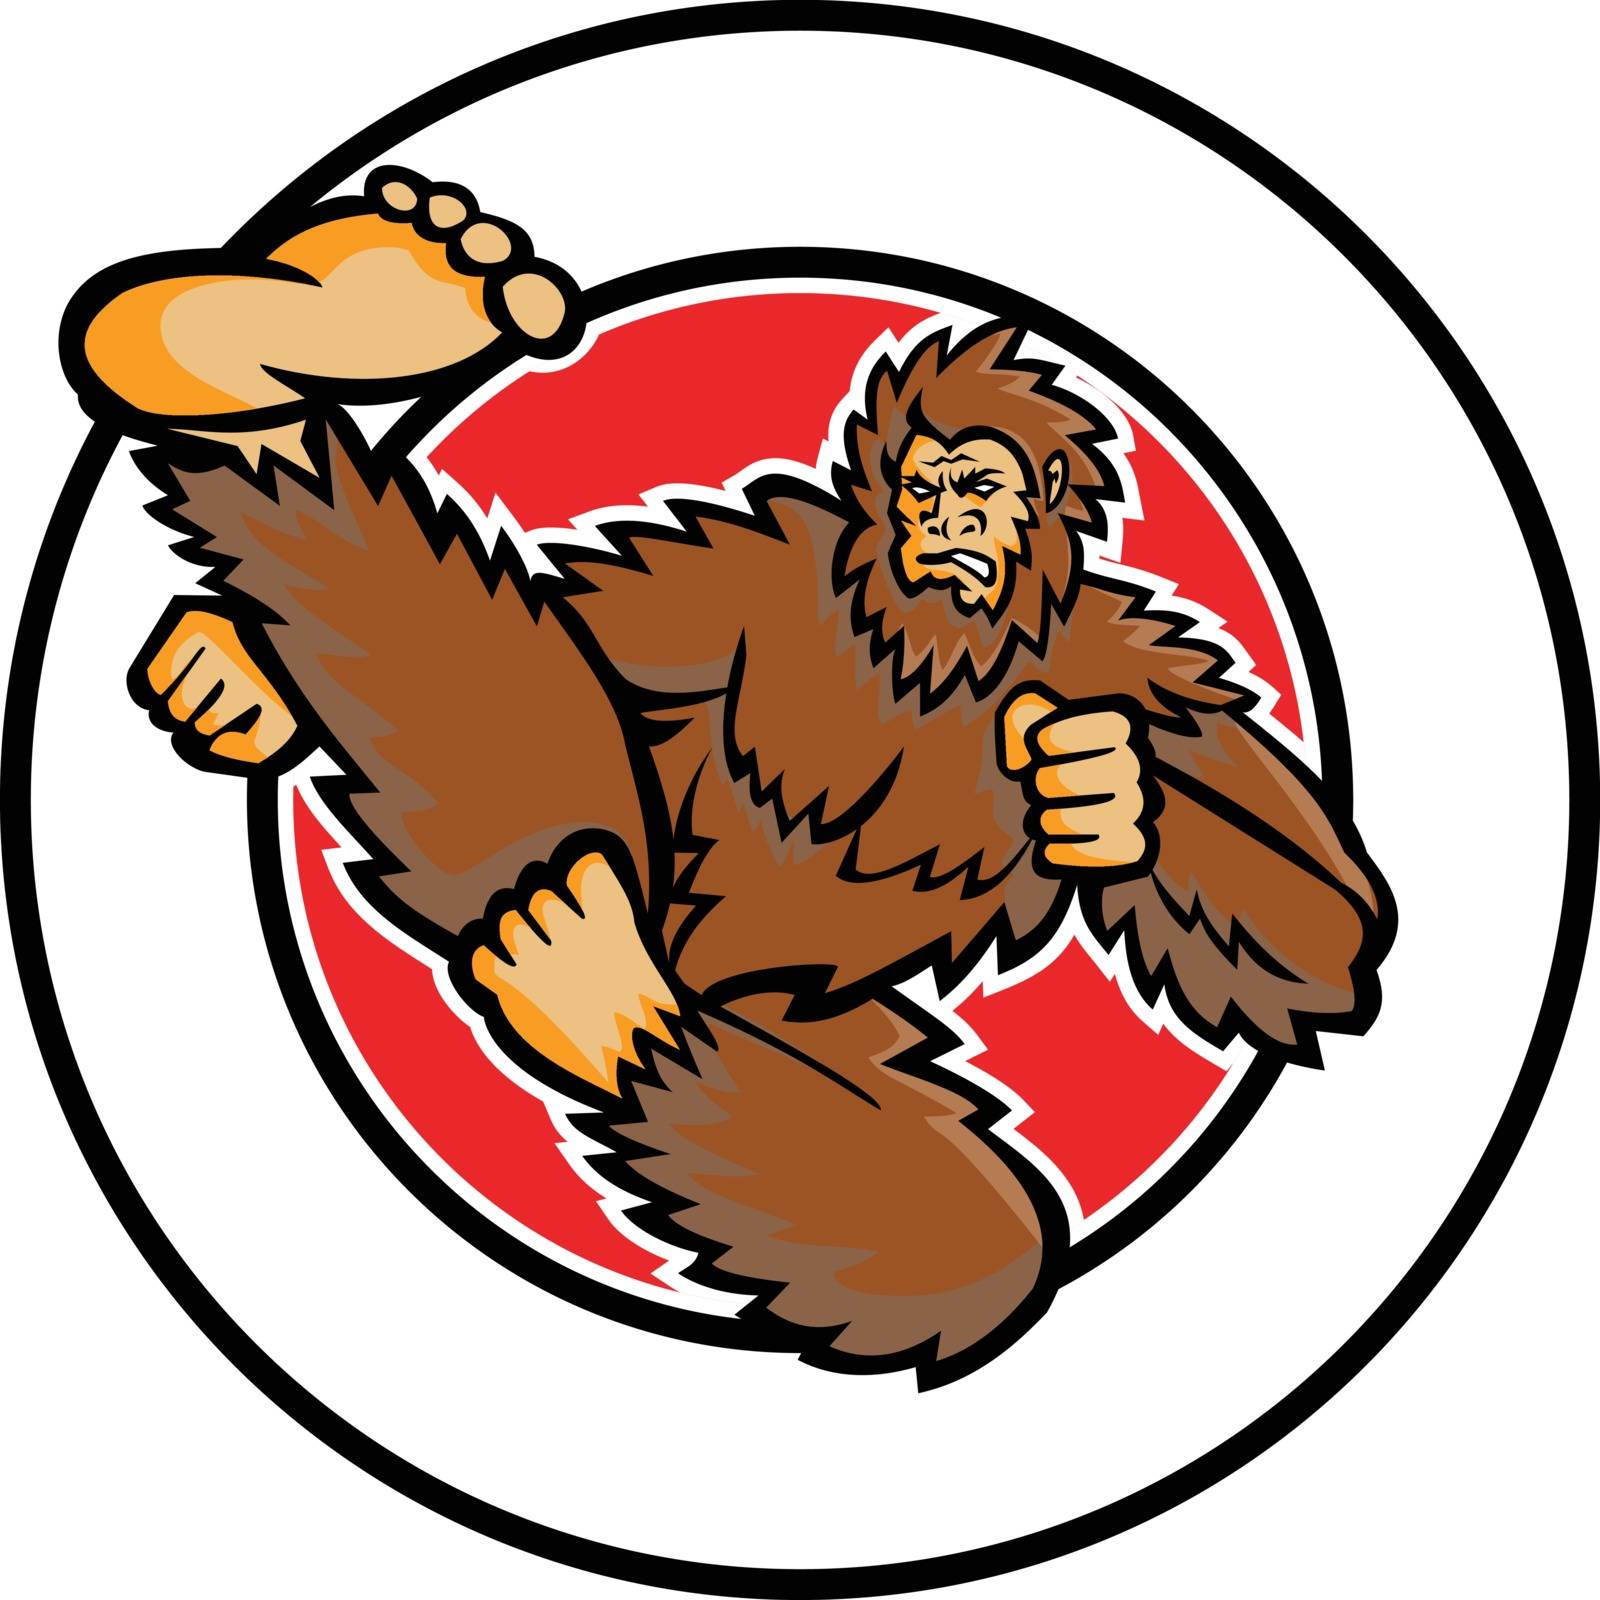 Mascot icon illustration of a Bigfoot or Sasquatch, a hairy ape like creature, doing a taekwondo Martial arts flying kick and kicking set inside circle on isolated background in retro style.